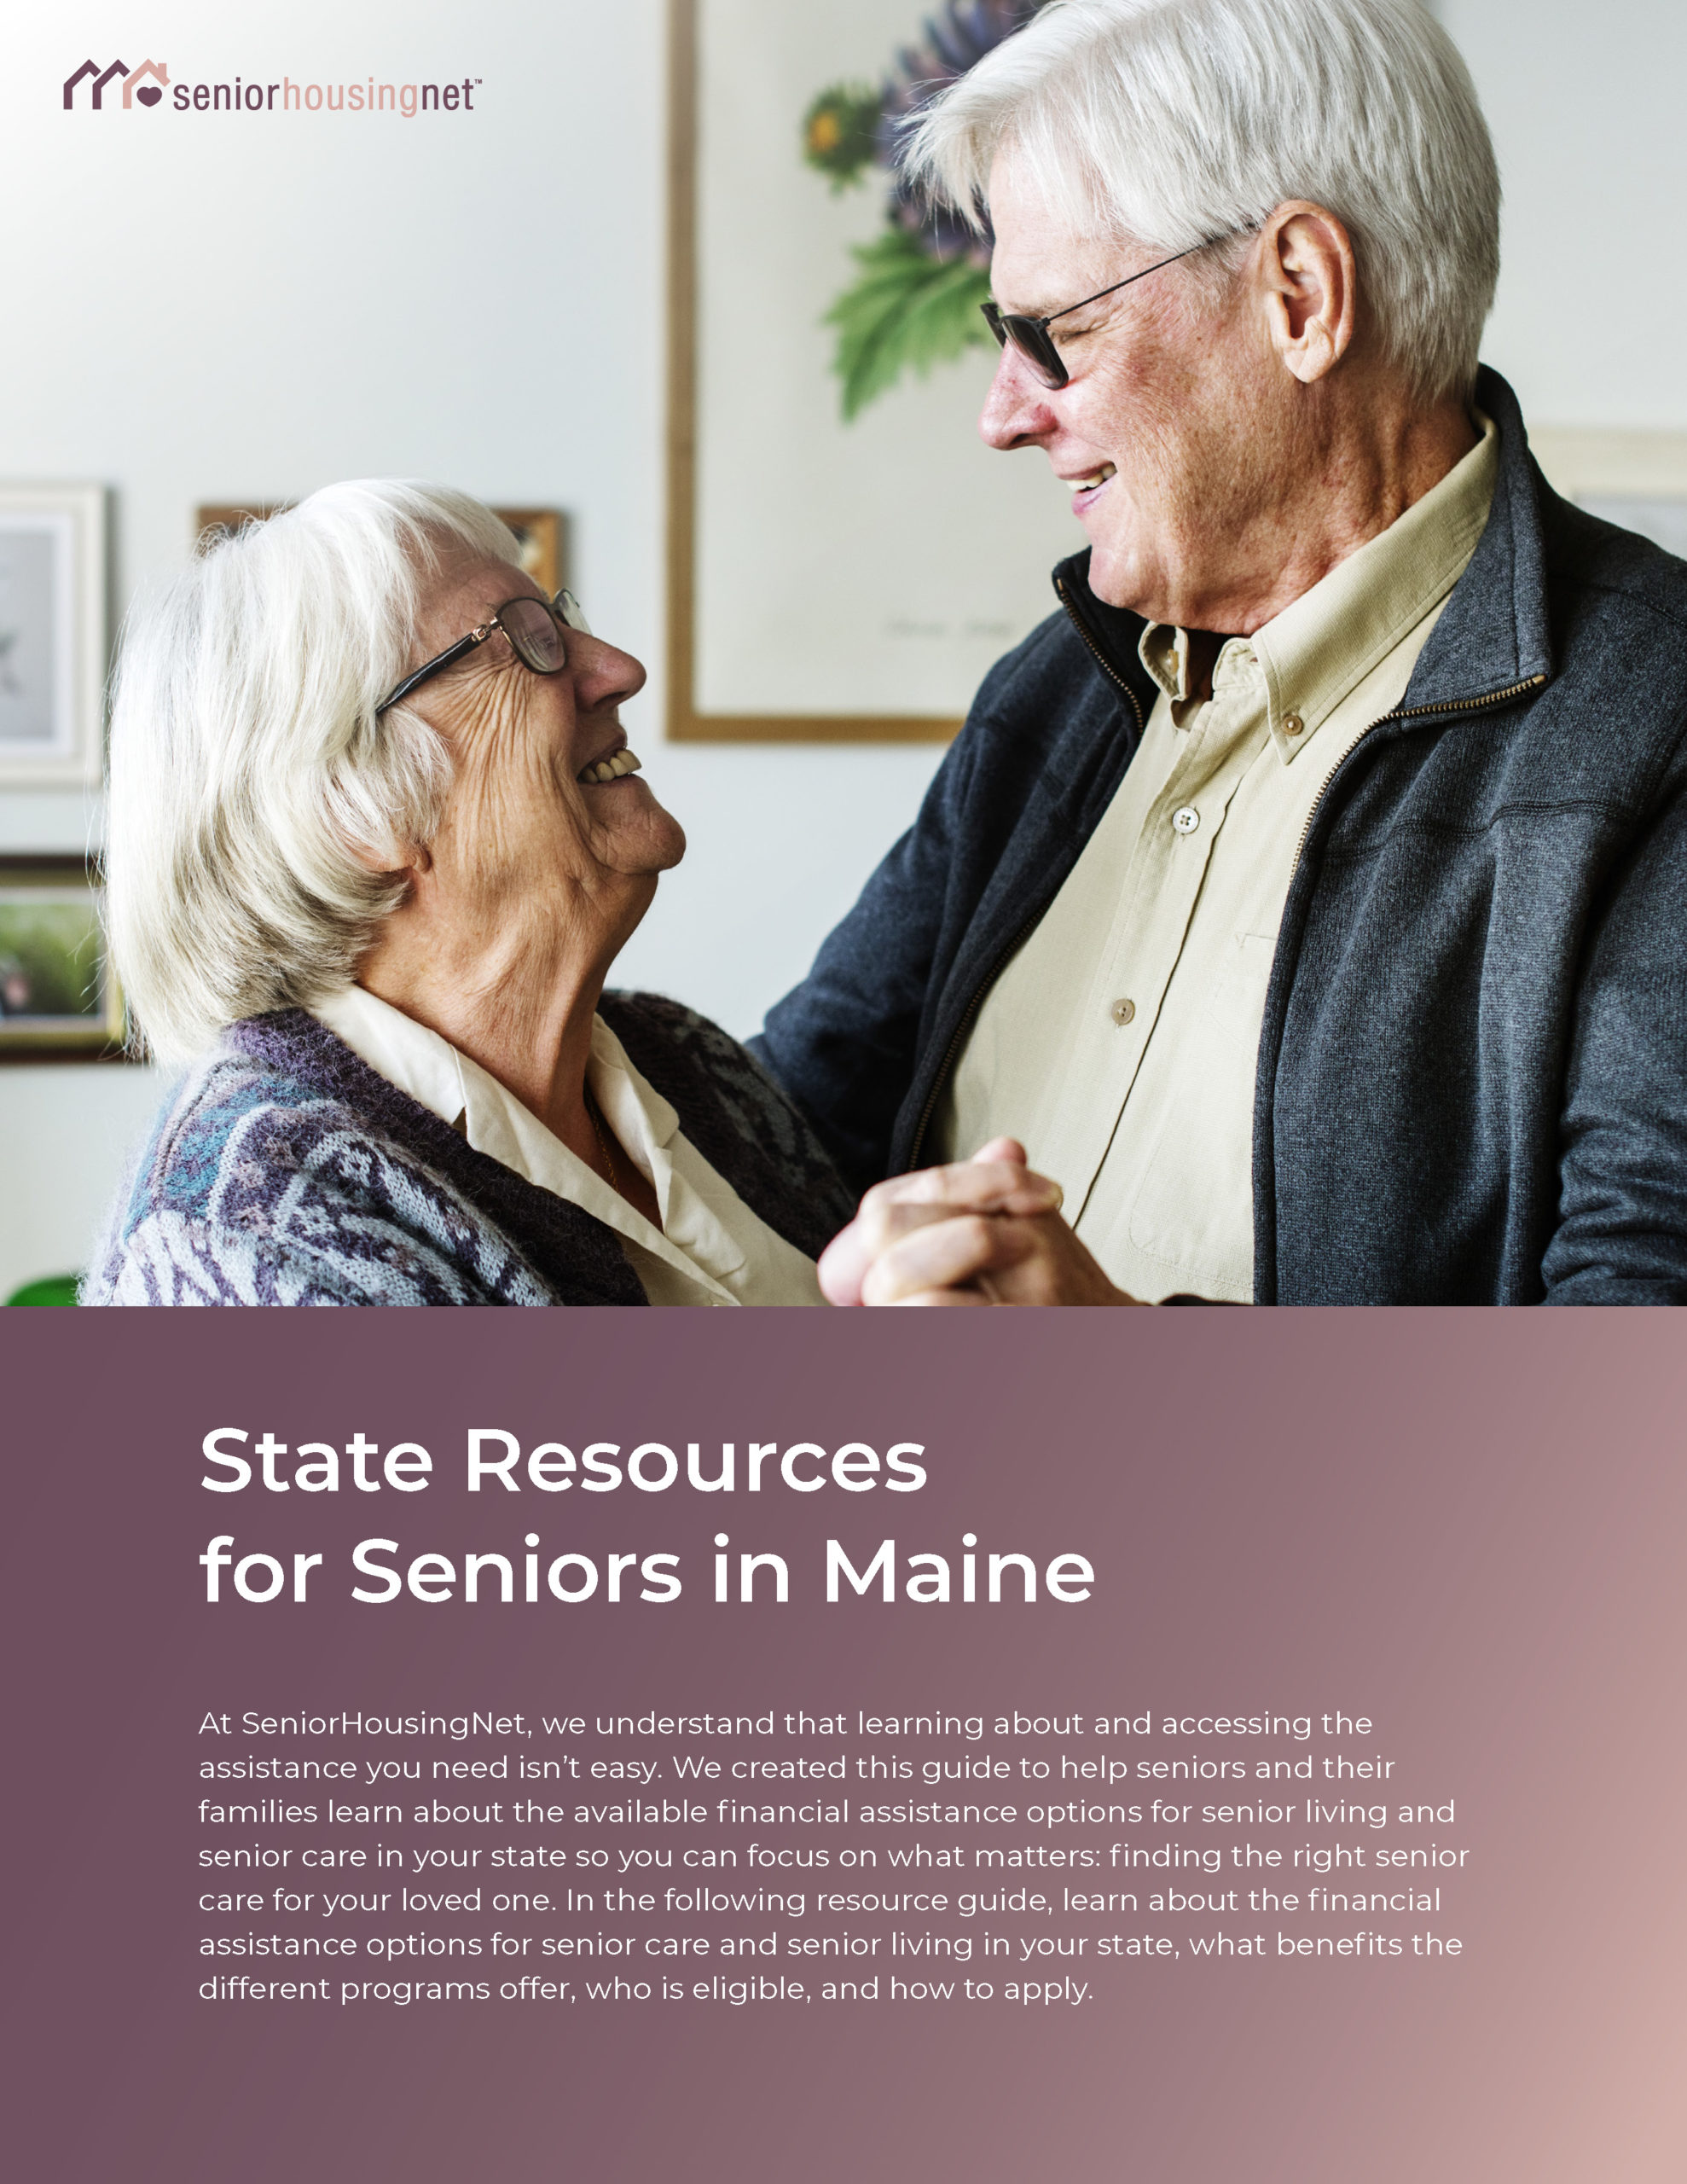 State Resources for Seniors in Maine